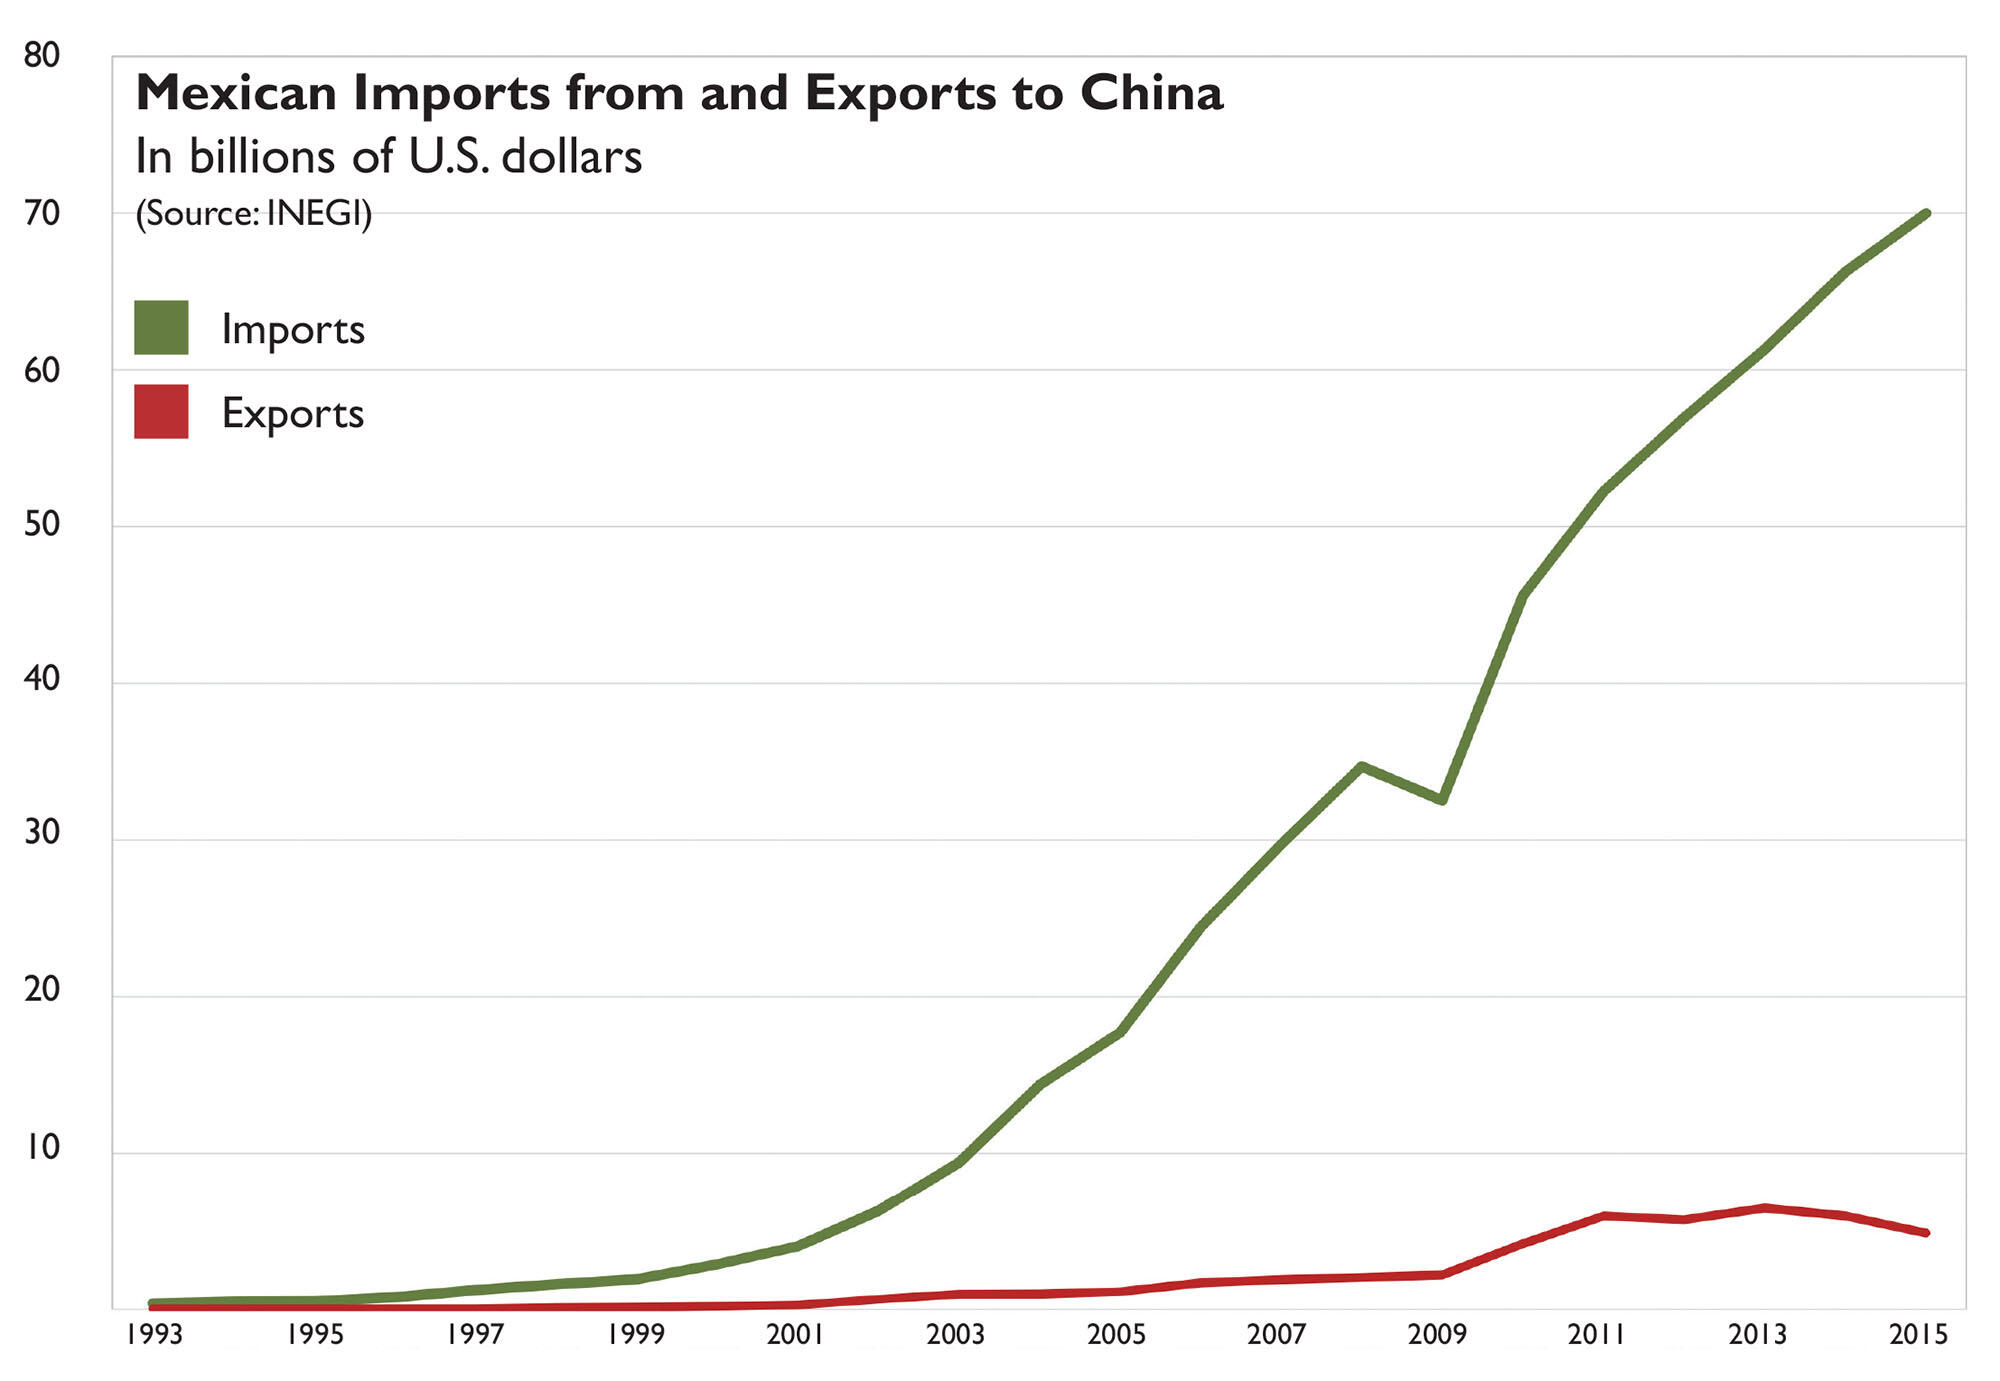 A graph of Mexican exports and imports from China shows dramatically rising imports since 2001. (Image by CLAS; data from INEGI.)